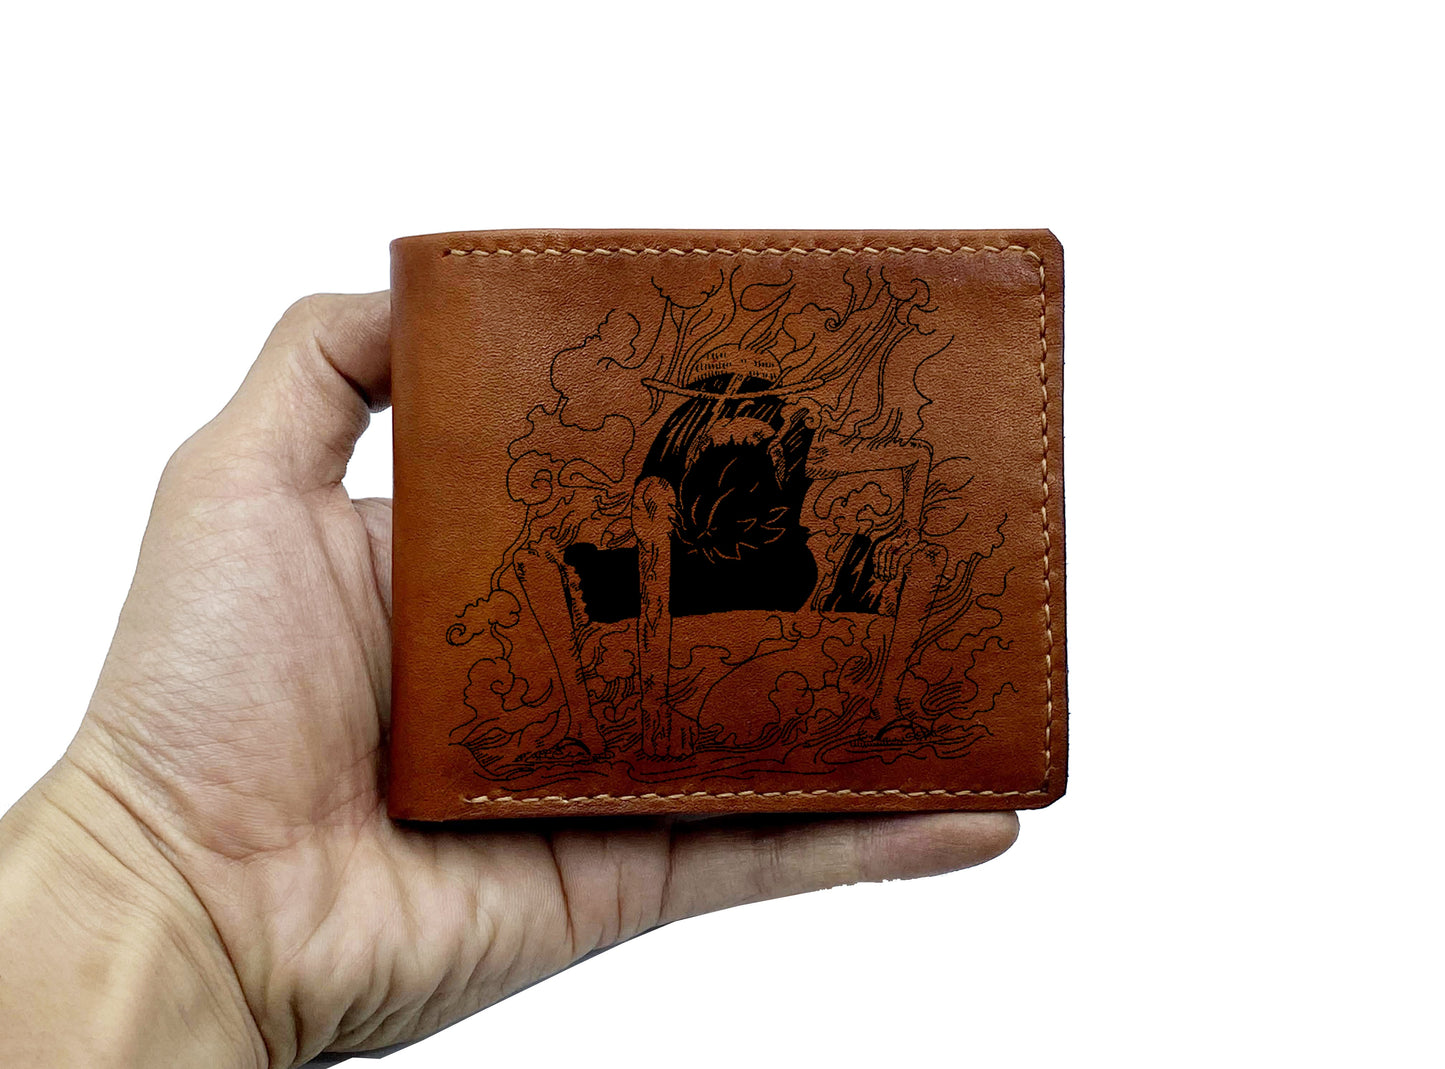 Mayan Corner - Luffy One piece engraving wallet, customized anime wallet, cute wallet for brother, birthday gift ideas for him